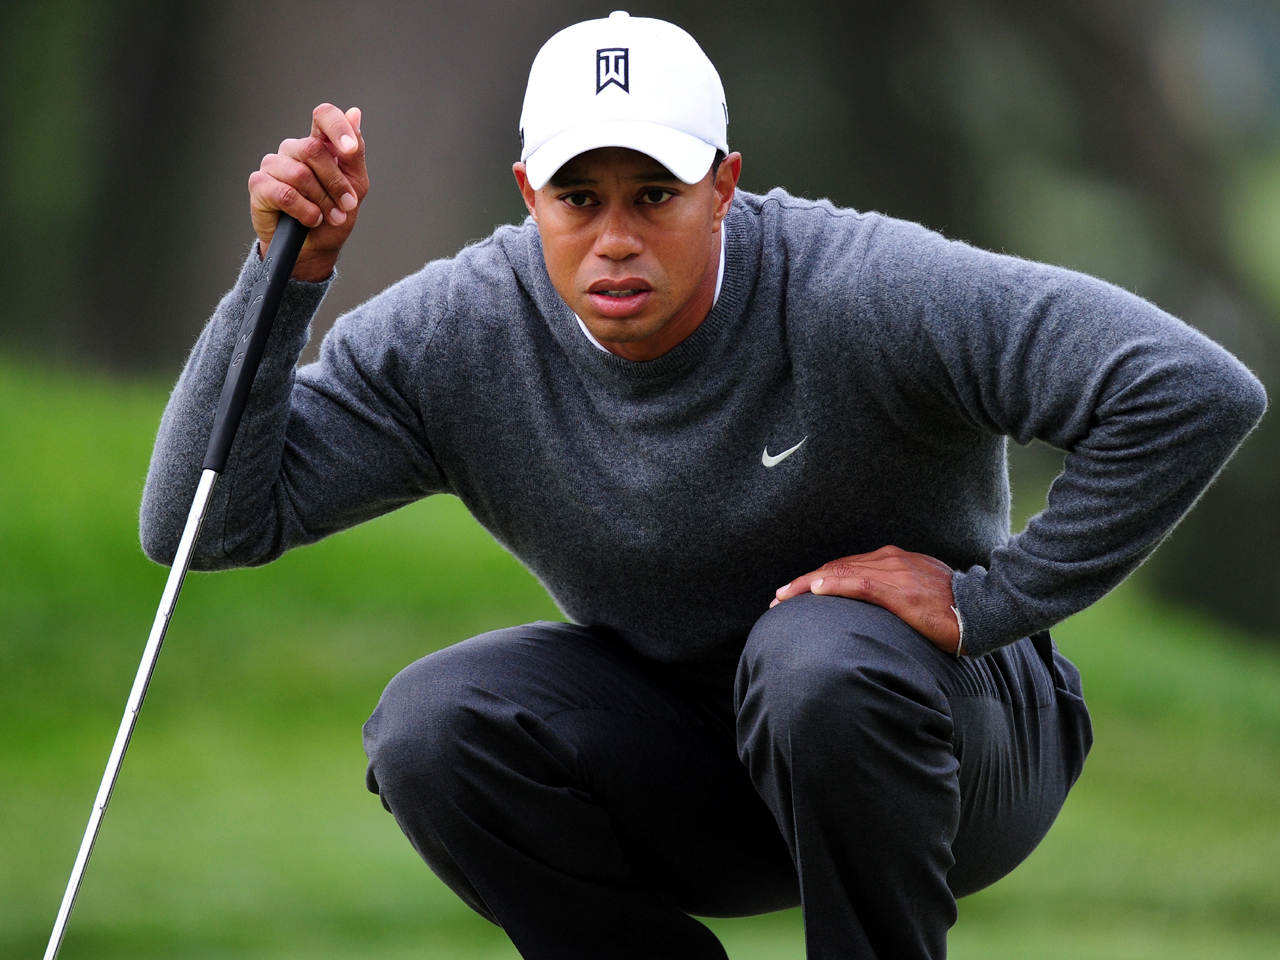 U.S. Open Tiger Woods starts strong at Olympic Club, but can he follow